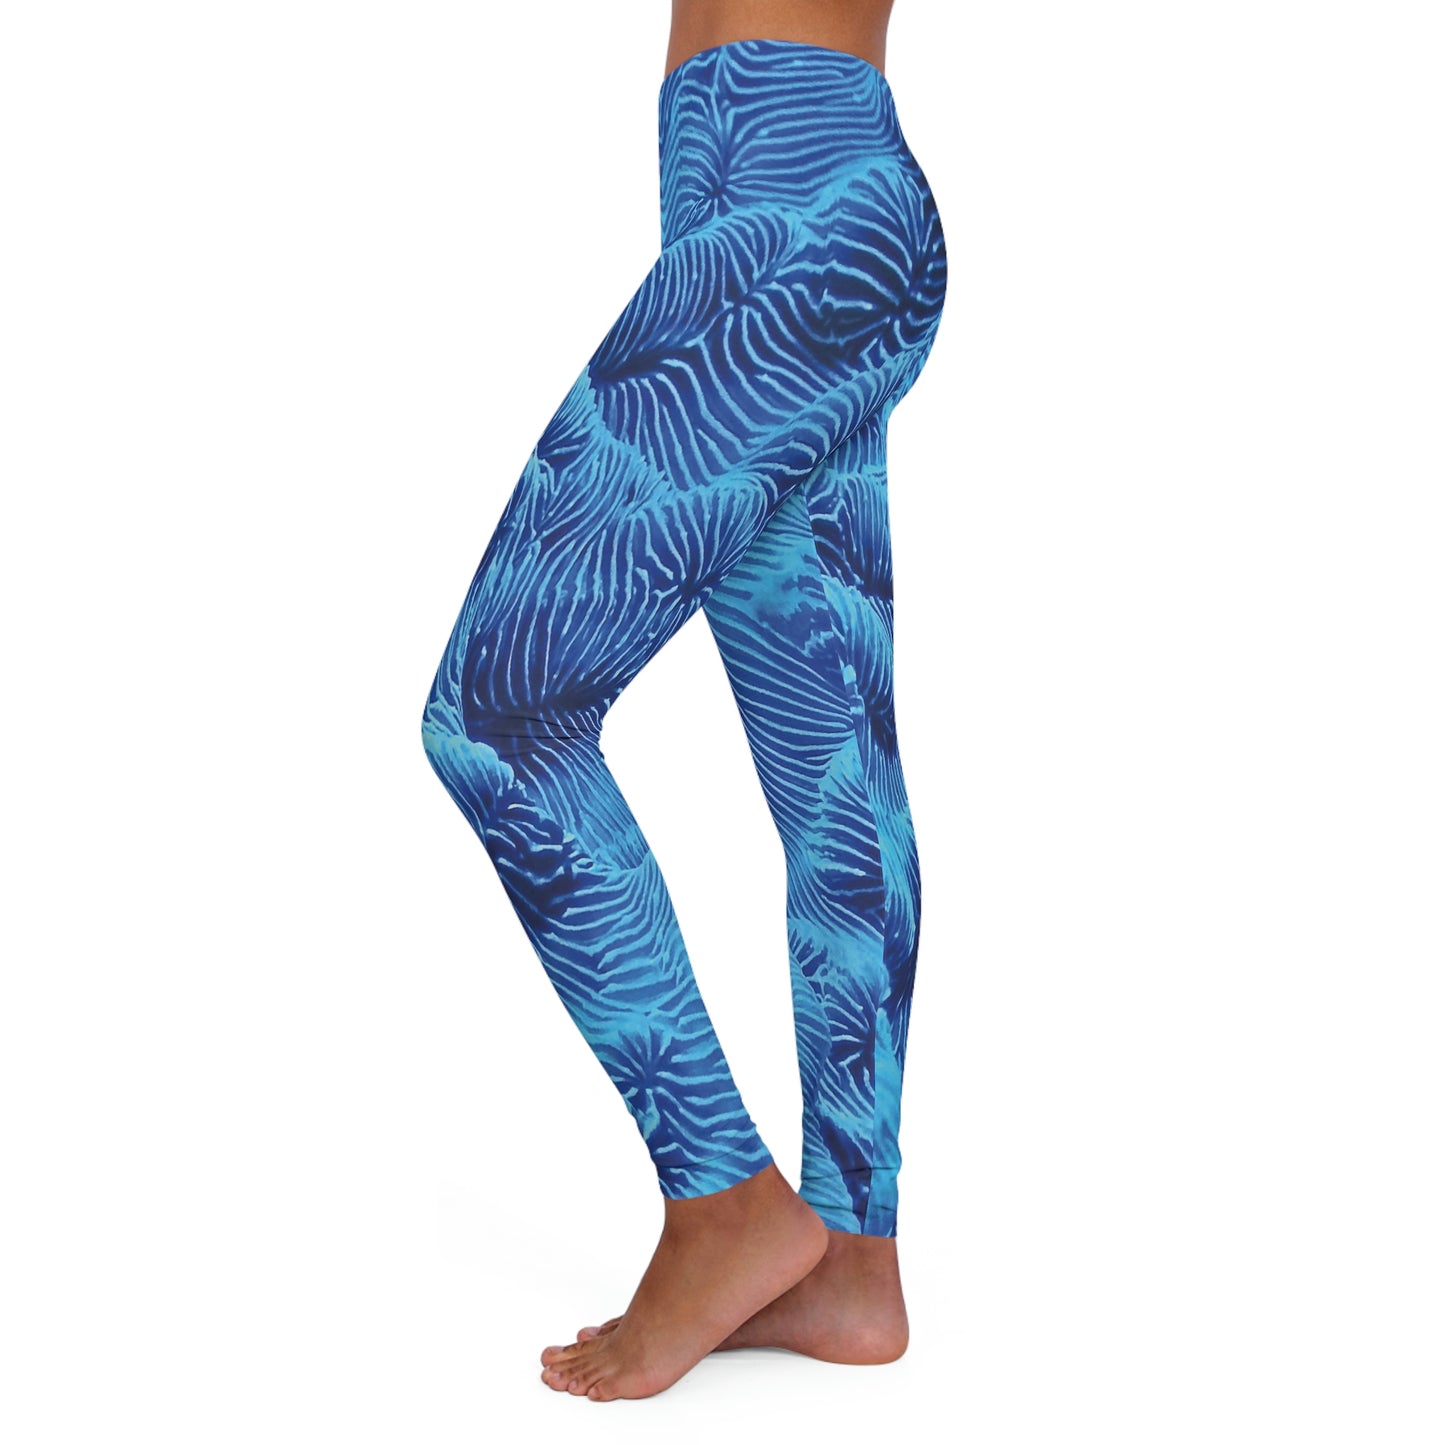 Beach Ocean Women Leggings, One of a Kind Gift - Unique Workout Activewear tights for Wife fitness, Mother, Girlfriend Christmas Gift